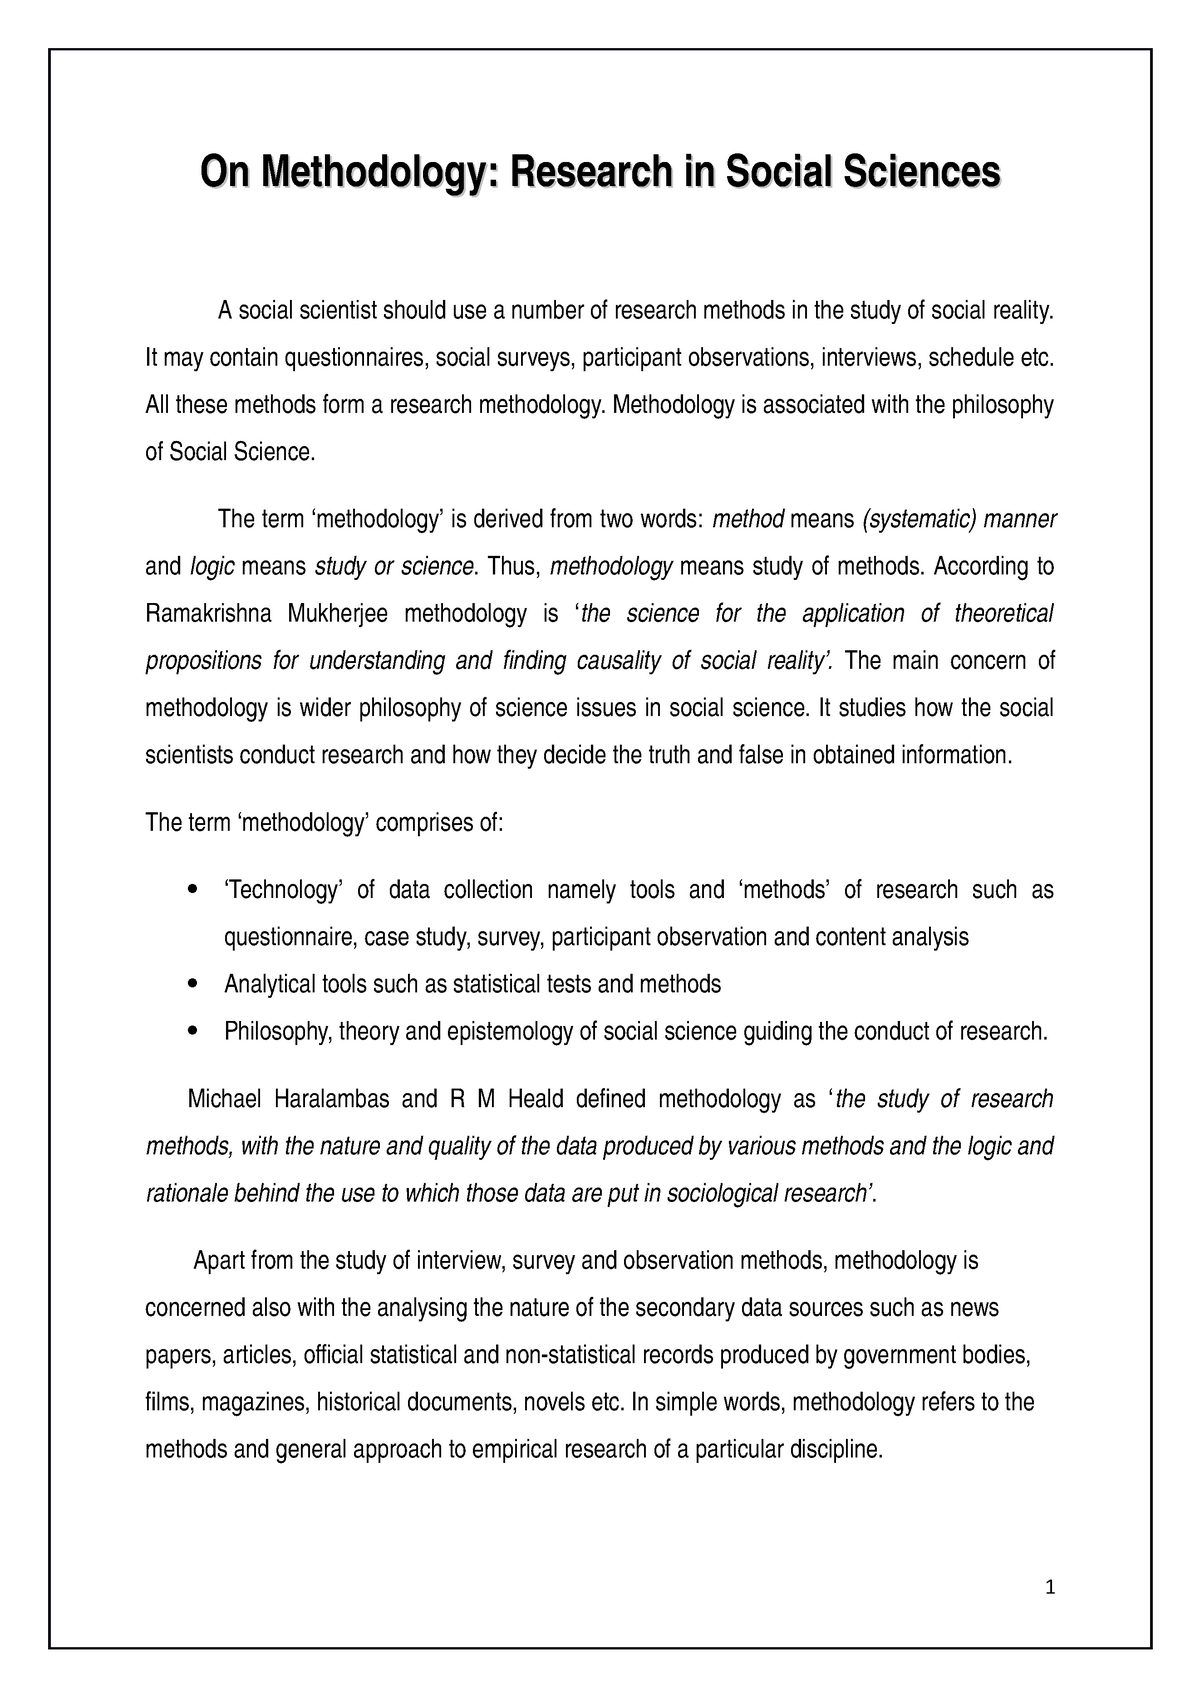 essay about methodology